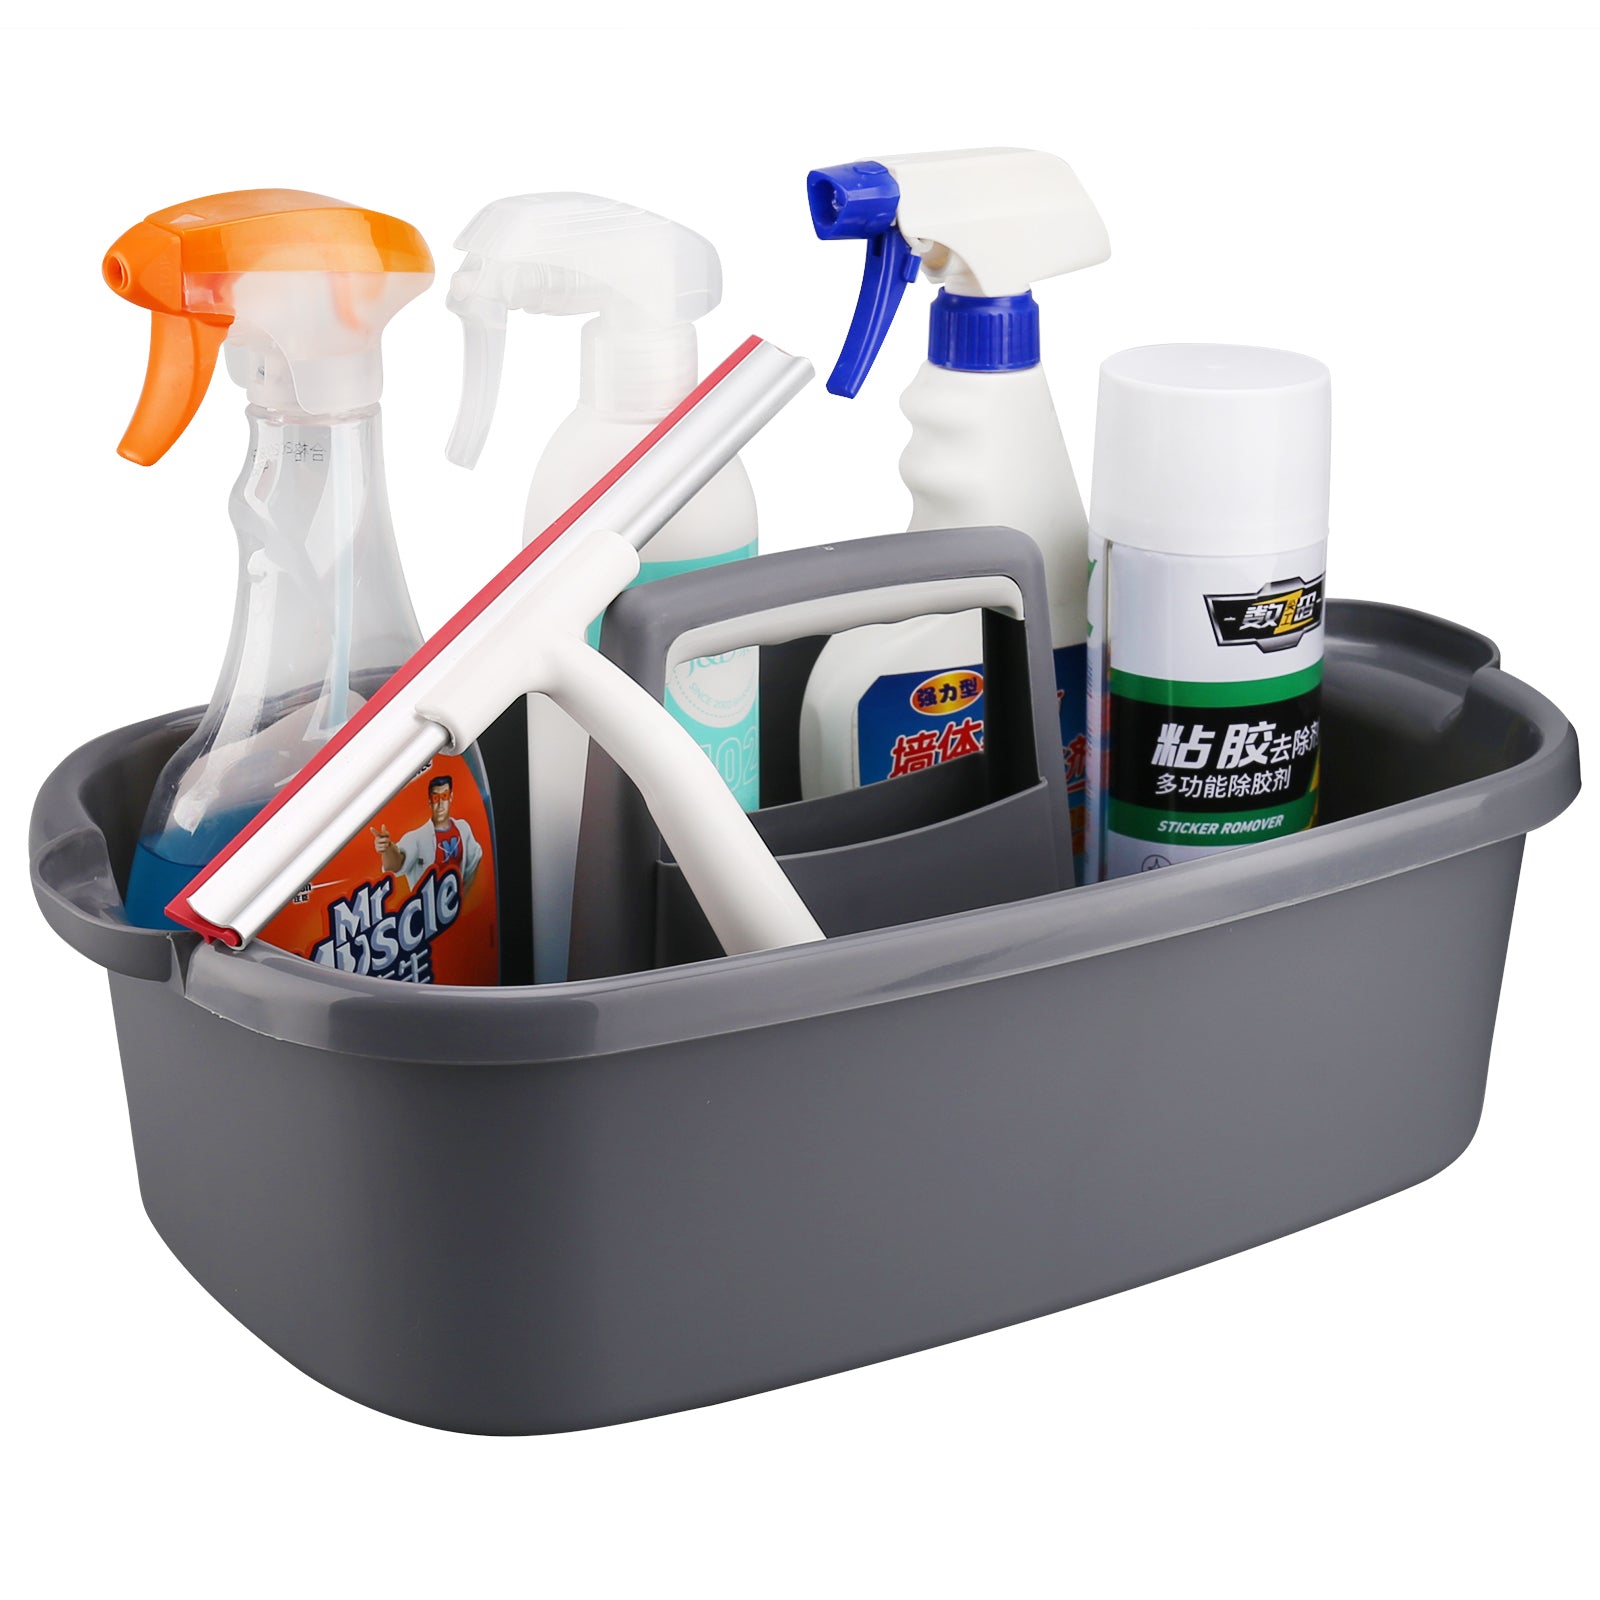 Cleaning Supplies, Household Items & Storage - Foods Co.